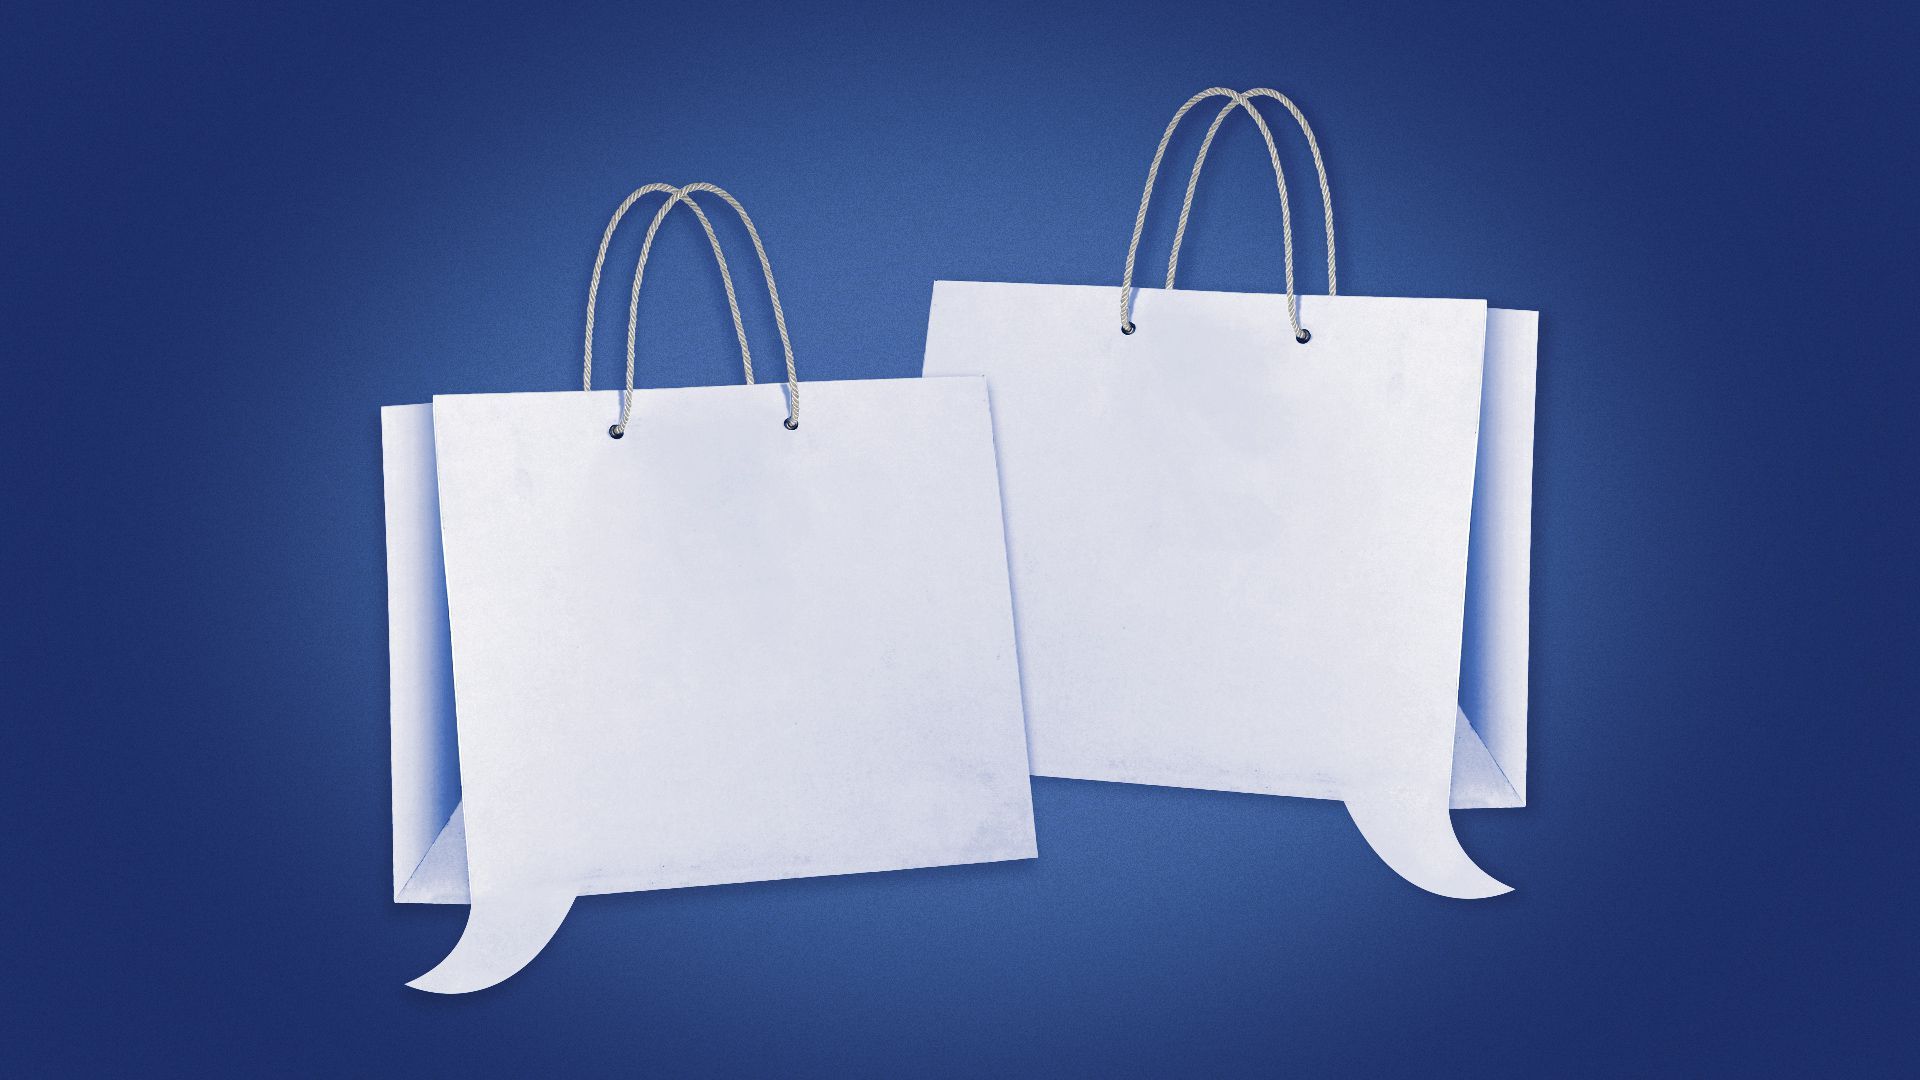 Illustration of two speech bubbles in the shape of shopping bags.